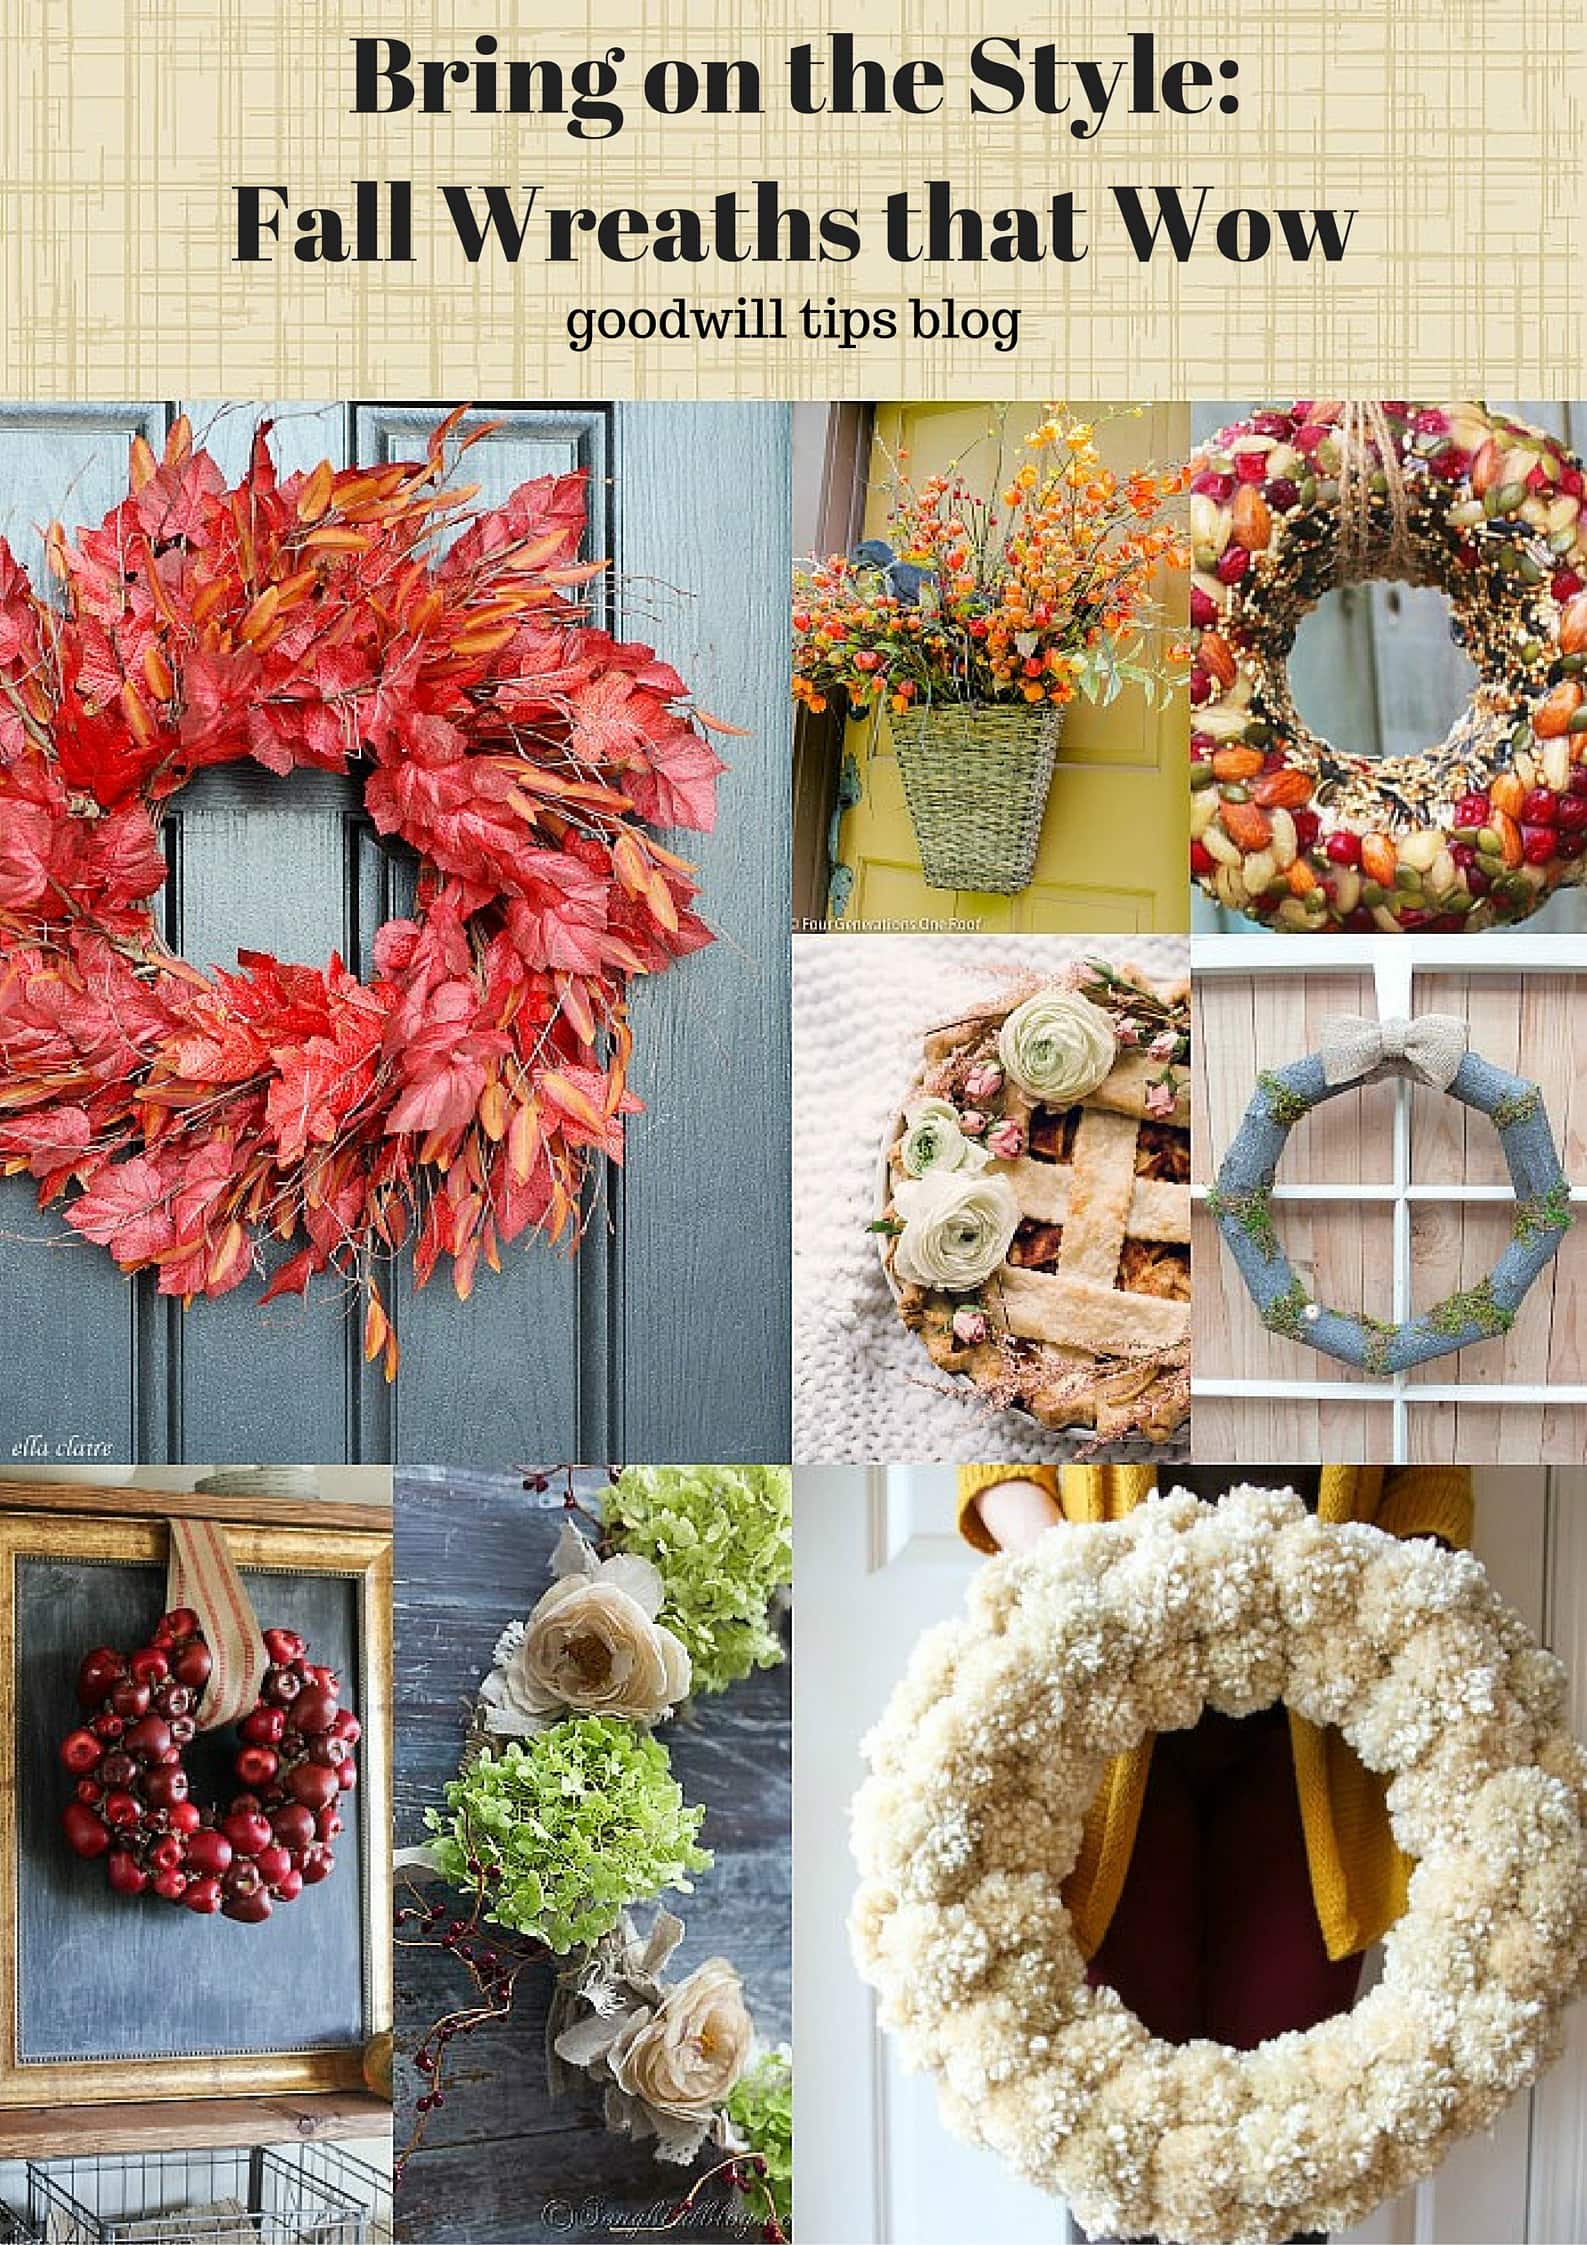 Fall Wreaths That Wow from MomAdvice.com